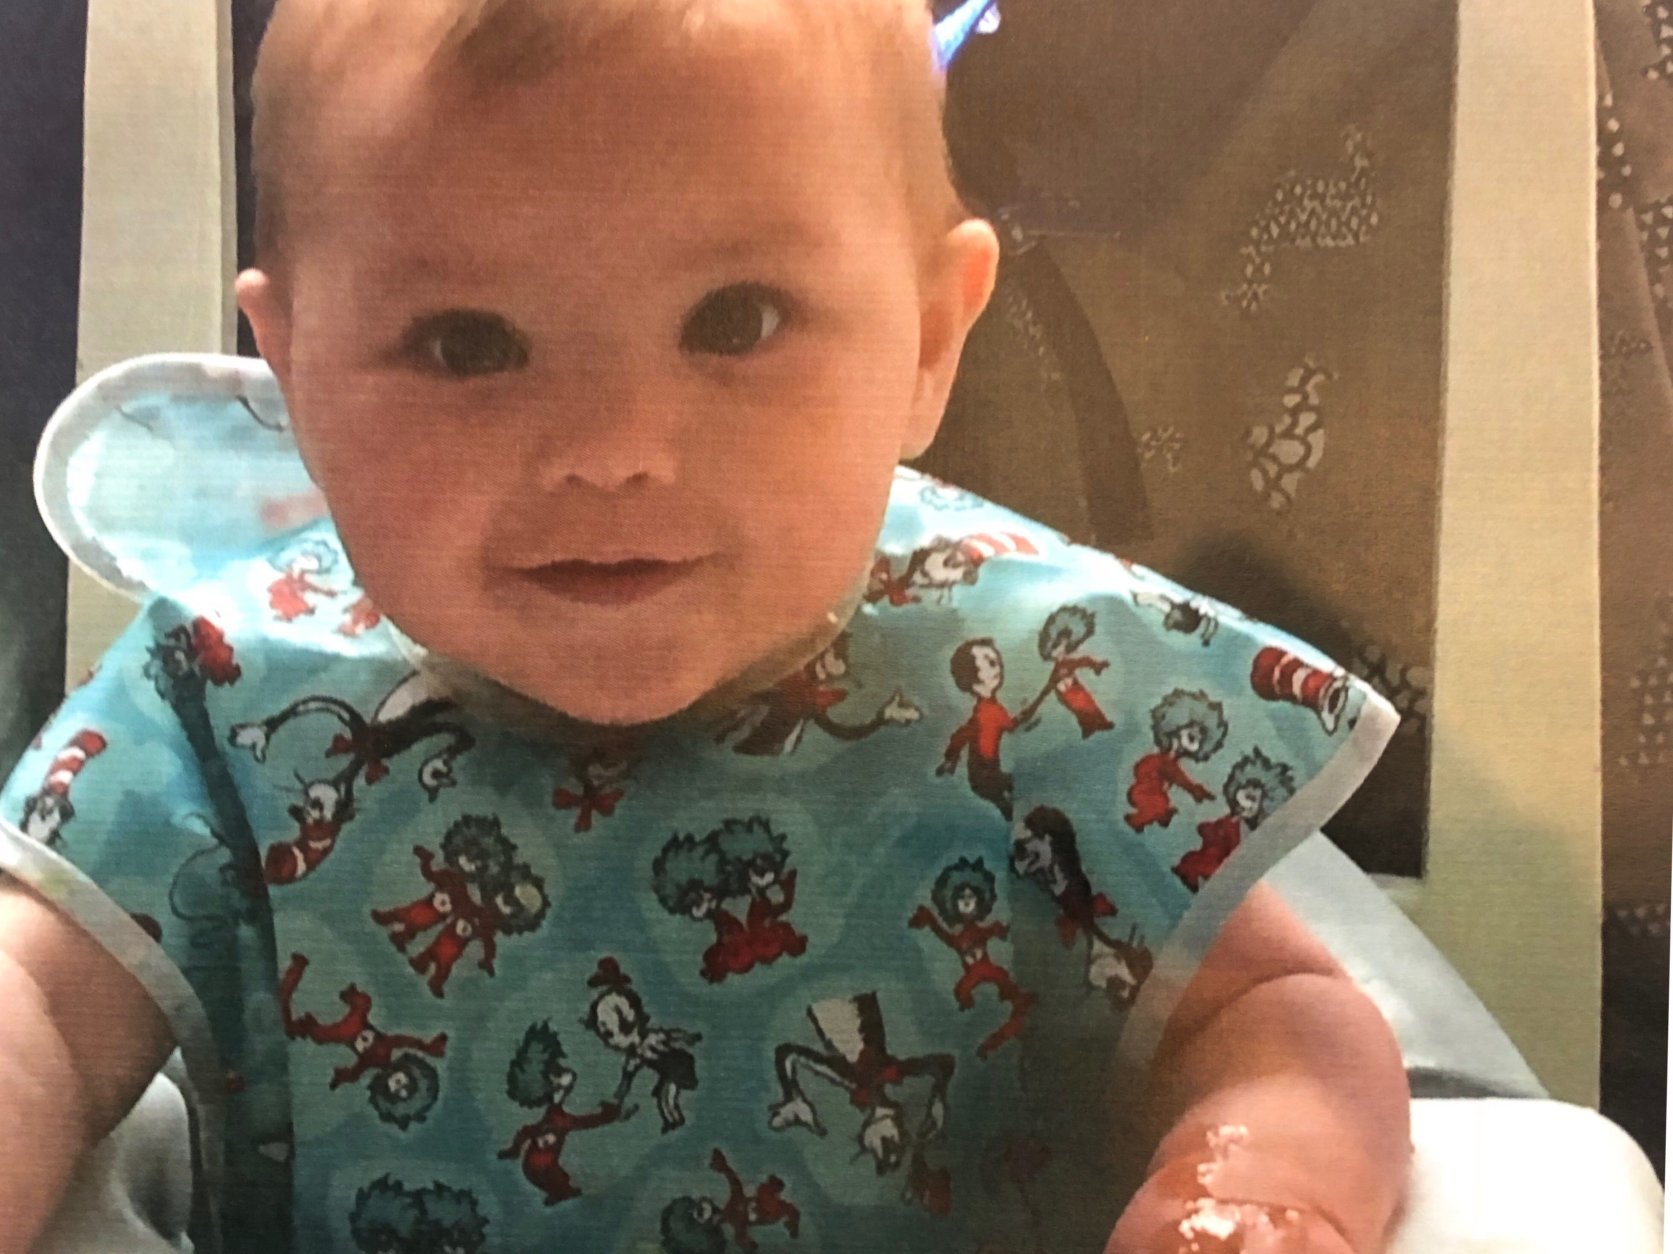 Kia Divband, 37, was found guilty in September of severely abusing 6-month-old Miller "Millie" Williams Lilliston at his in-home day care. (Photo courtesy Montgomery County State's Attorneys Office)